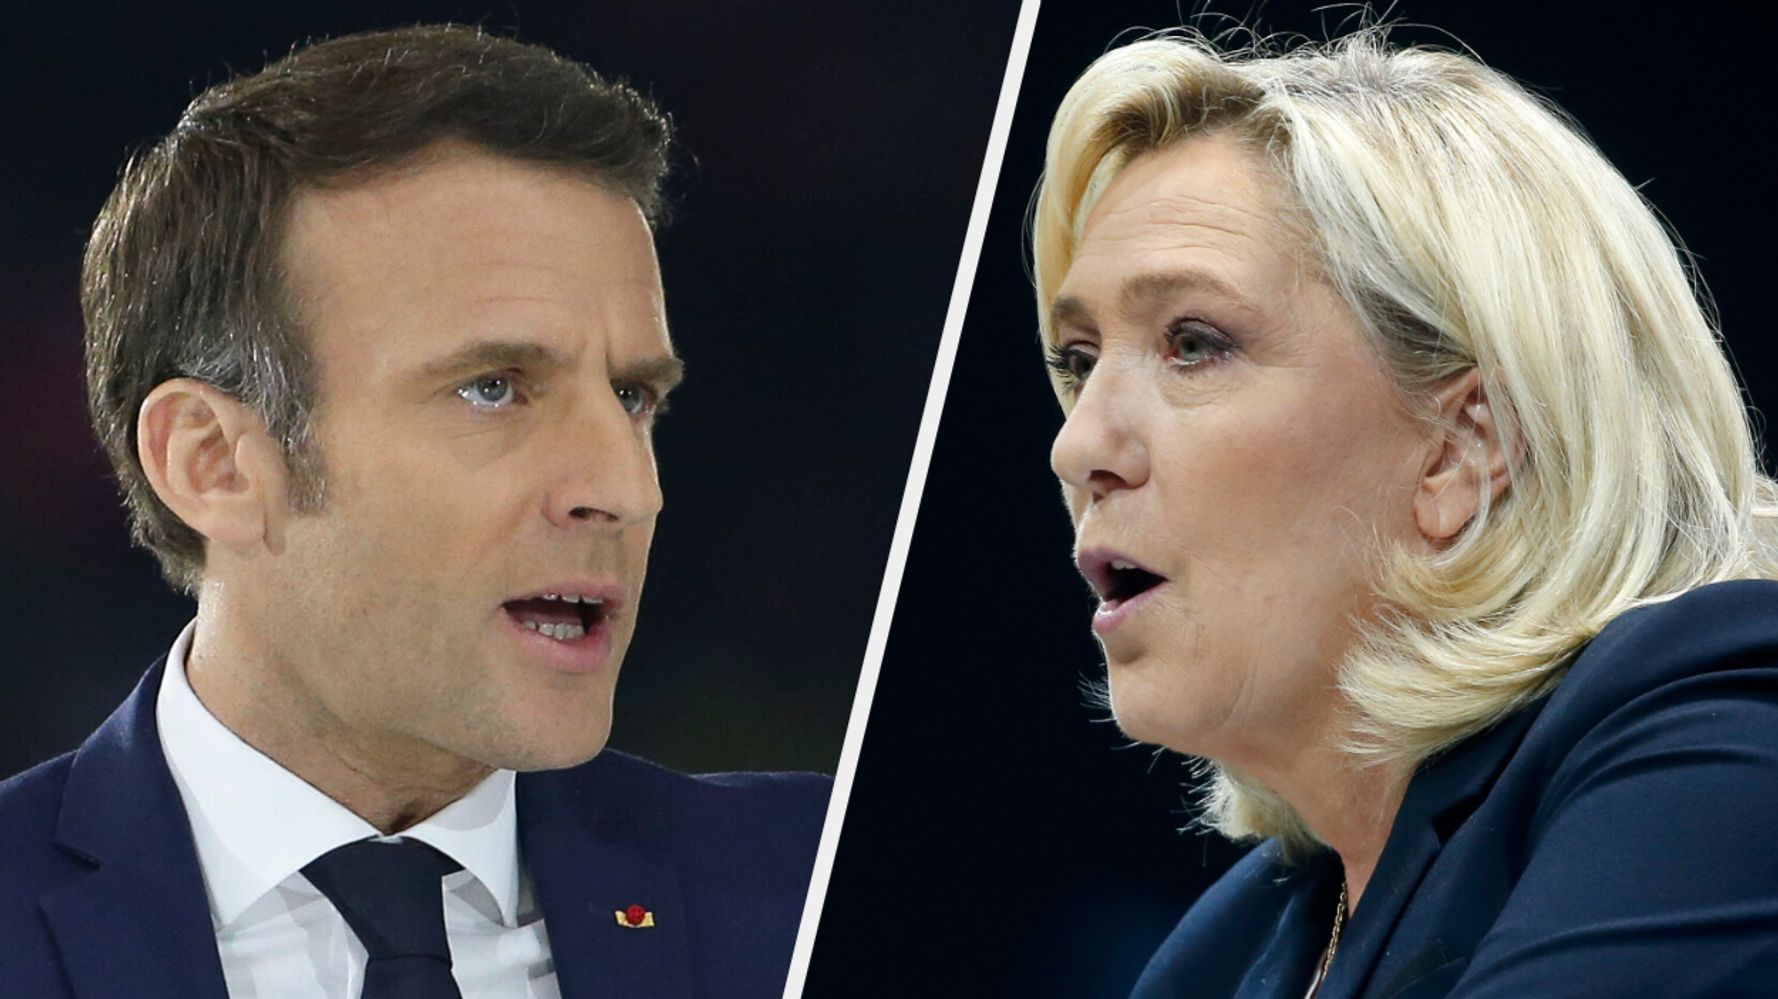 With Le Pen Breathing Down Macron’s Neck, Is France About To Have Its Brexit?